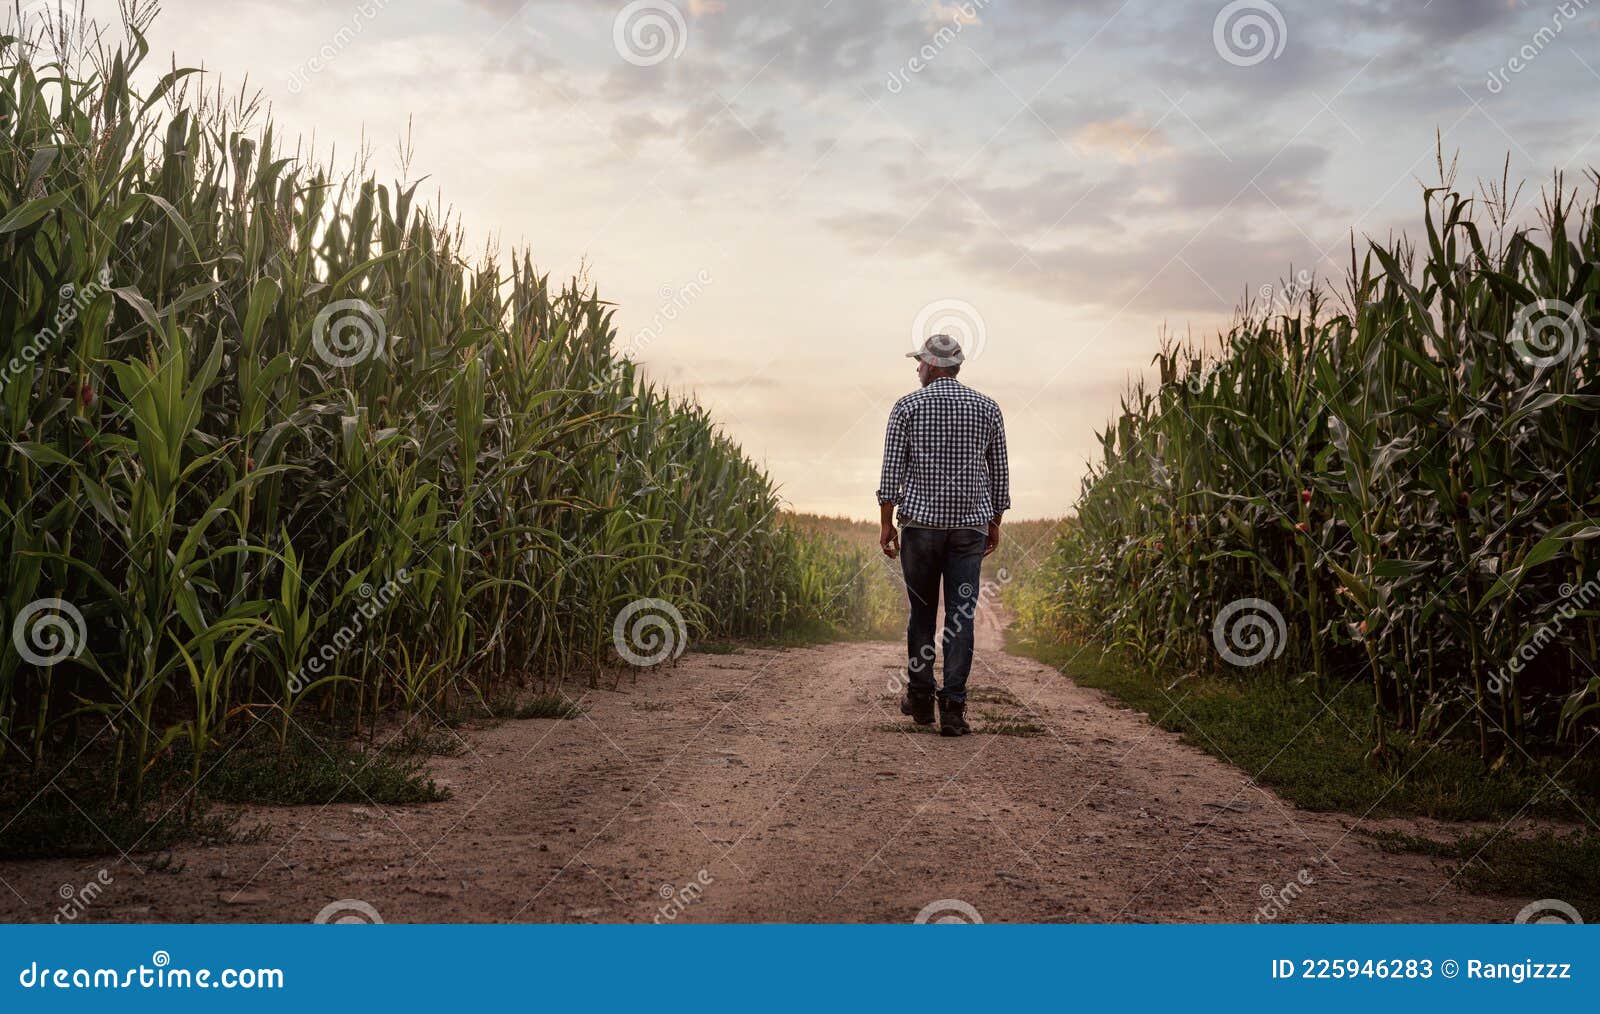 farmer checking the quality of his corn field